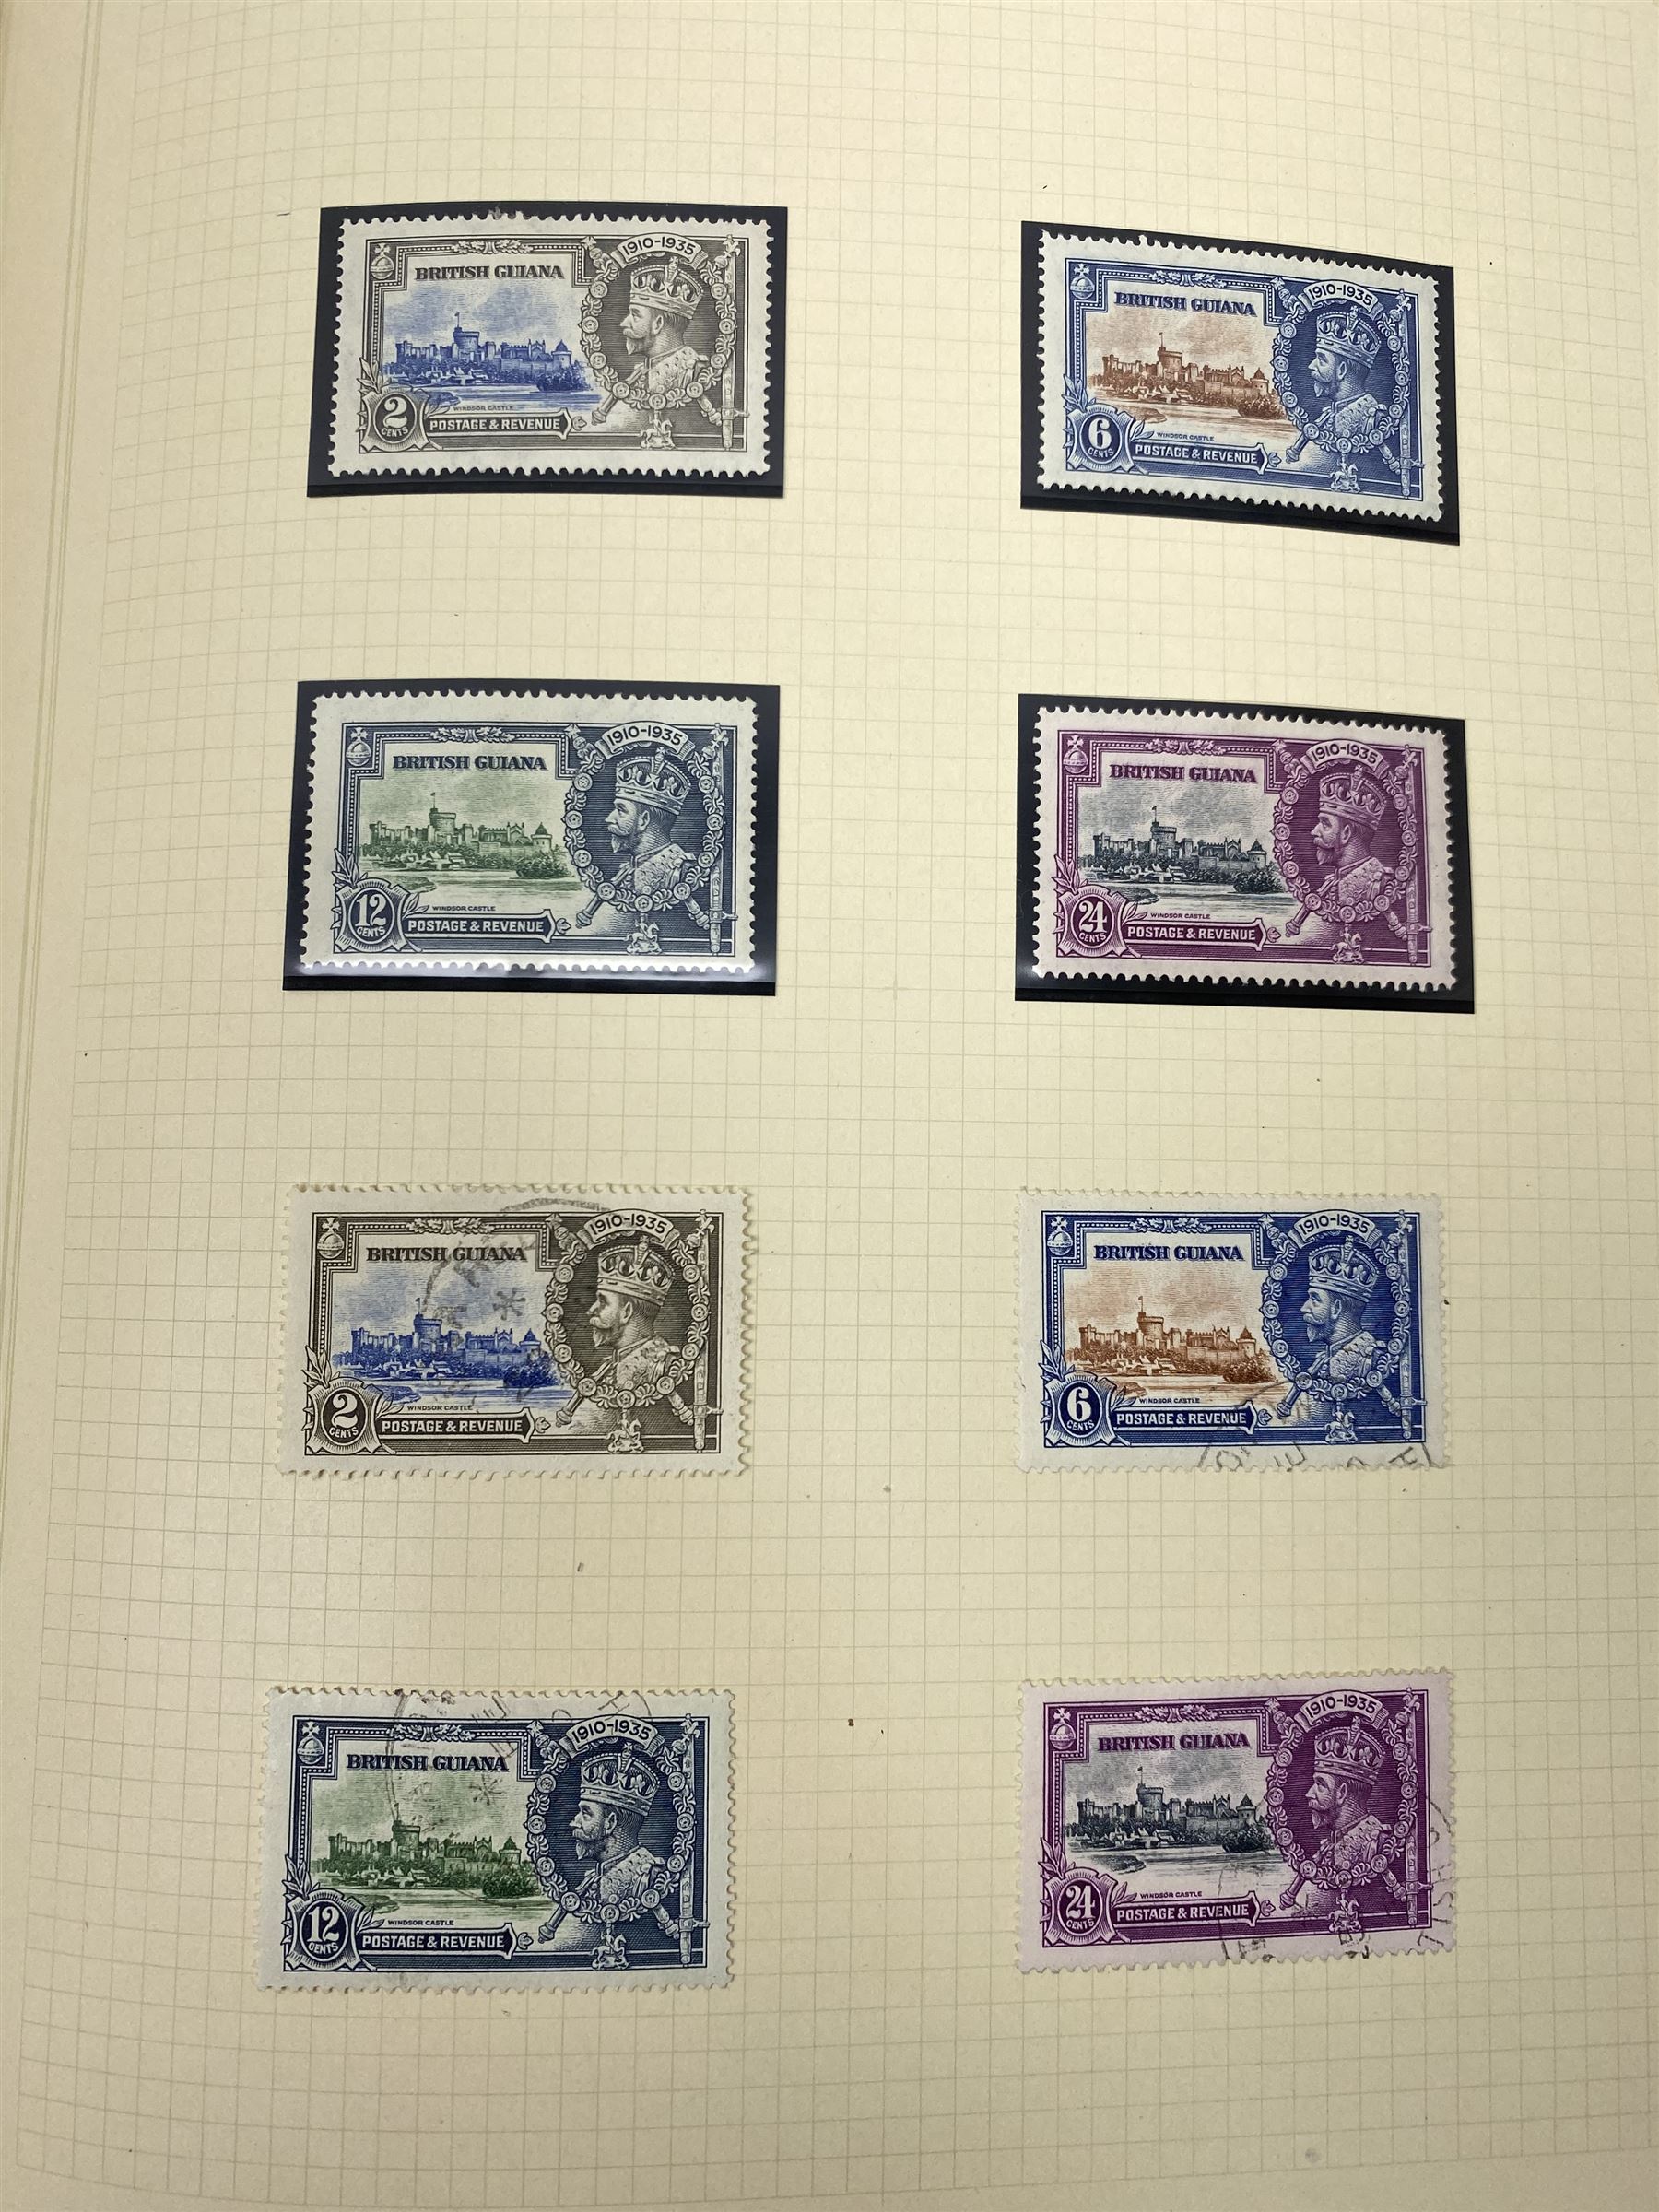 King George V 1935 Silver Jubilee stamps - Image 12 of 17